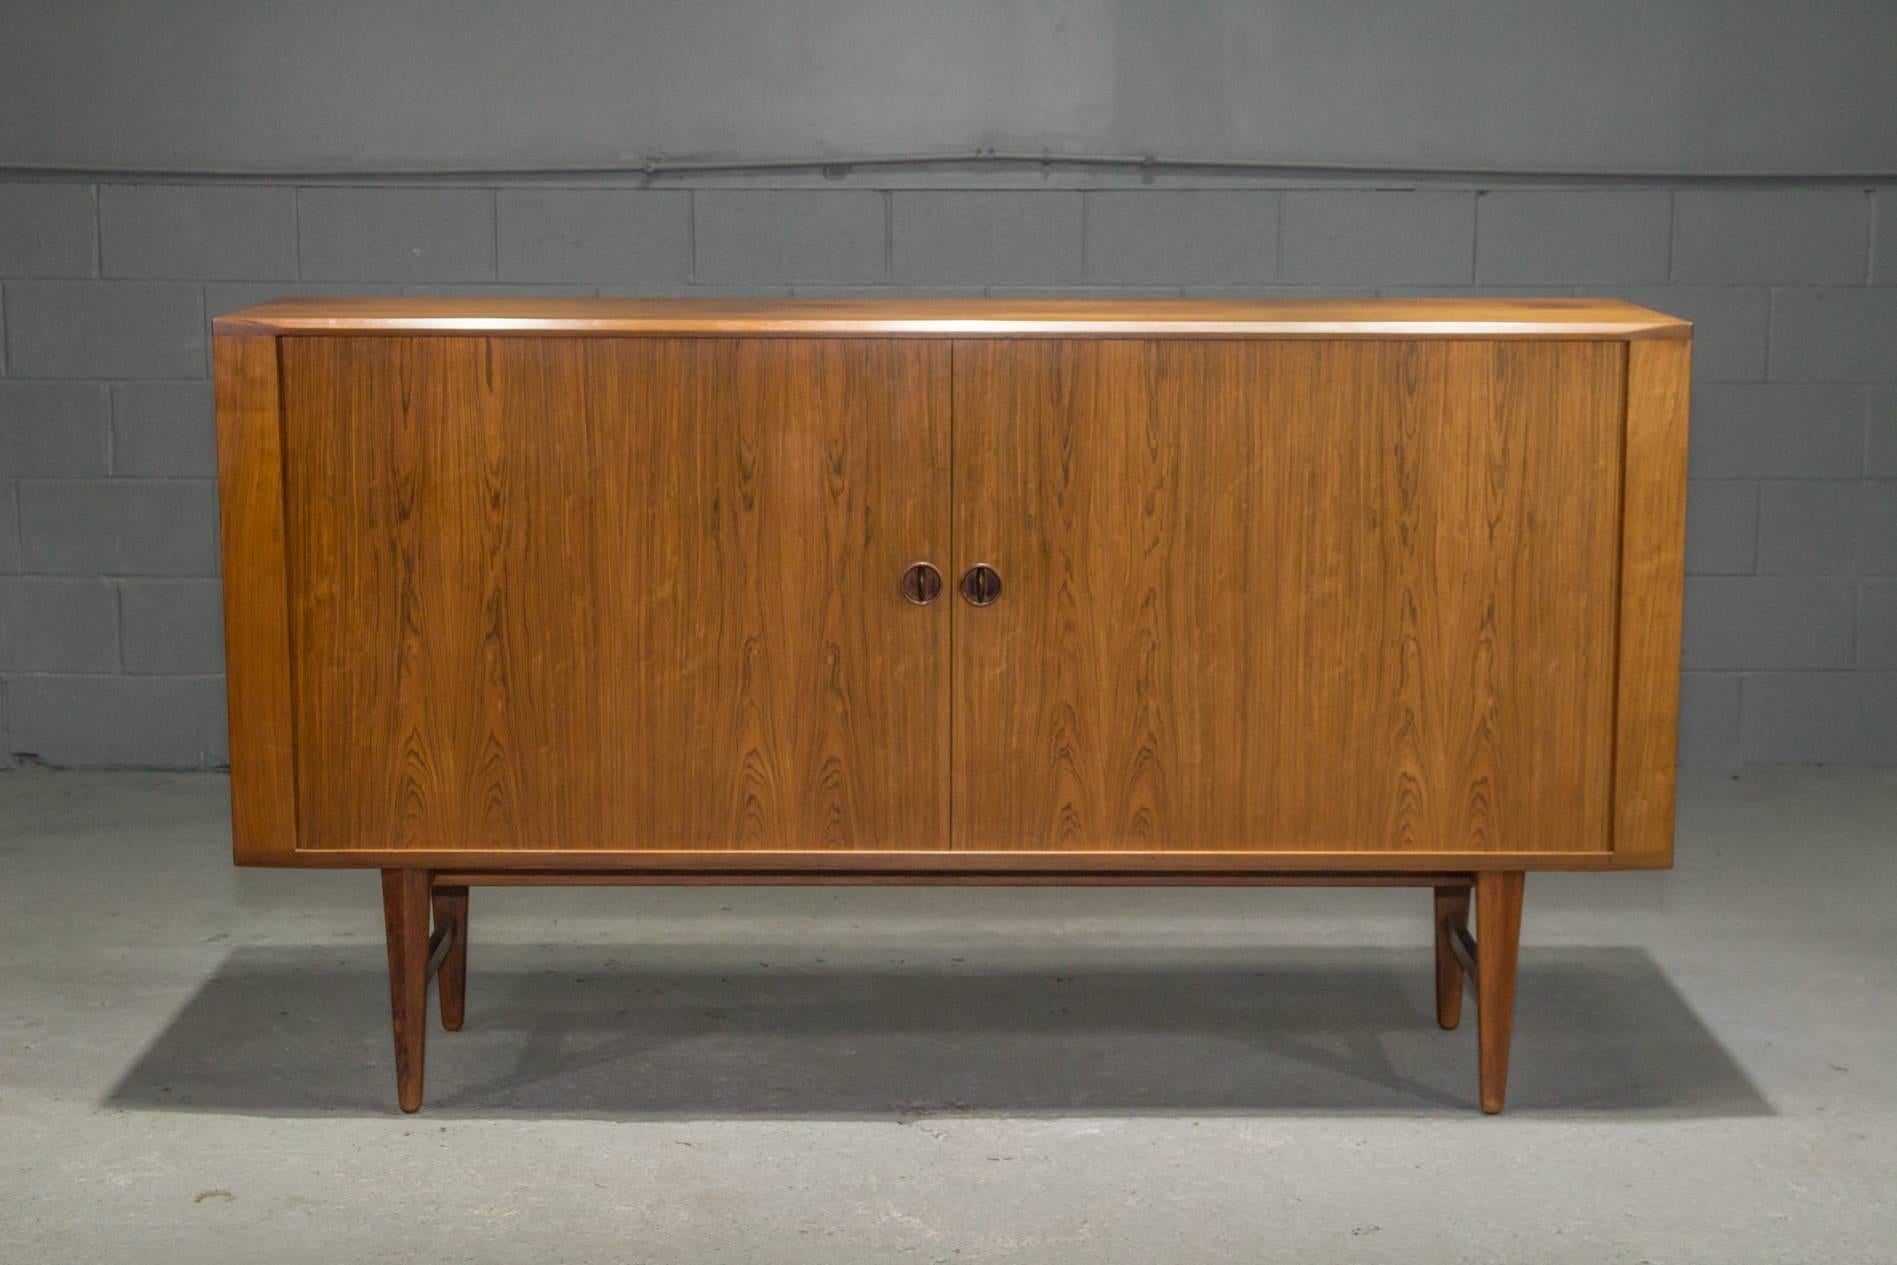 Danish Modern High Rosewood Sideboard with Tambour Doors. Doors open to reveal three large storage areas with two adjustable shelves on either side, as well as an adjustable shelf and four felt-lined cutlery drawers in the middle. Beautifully